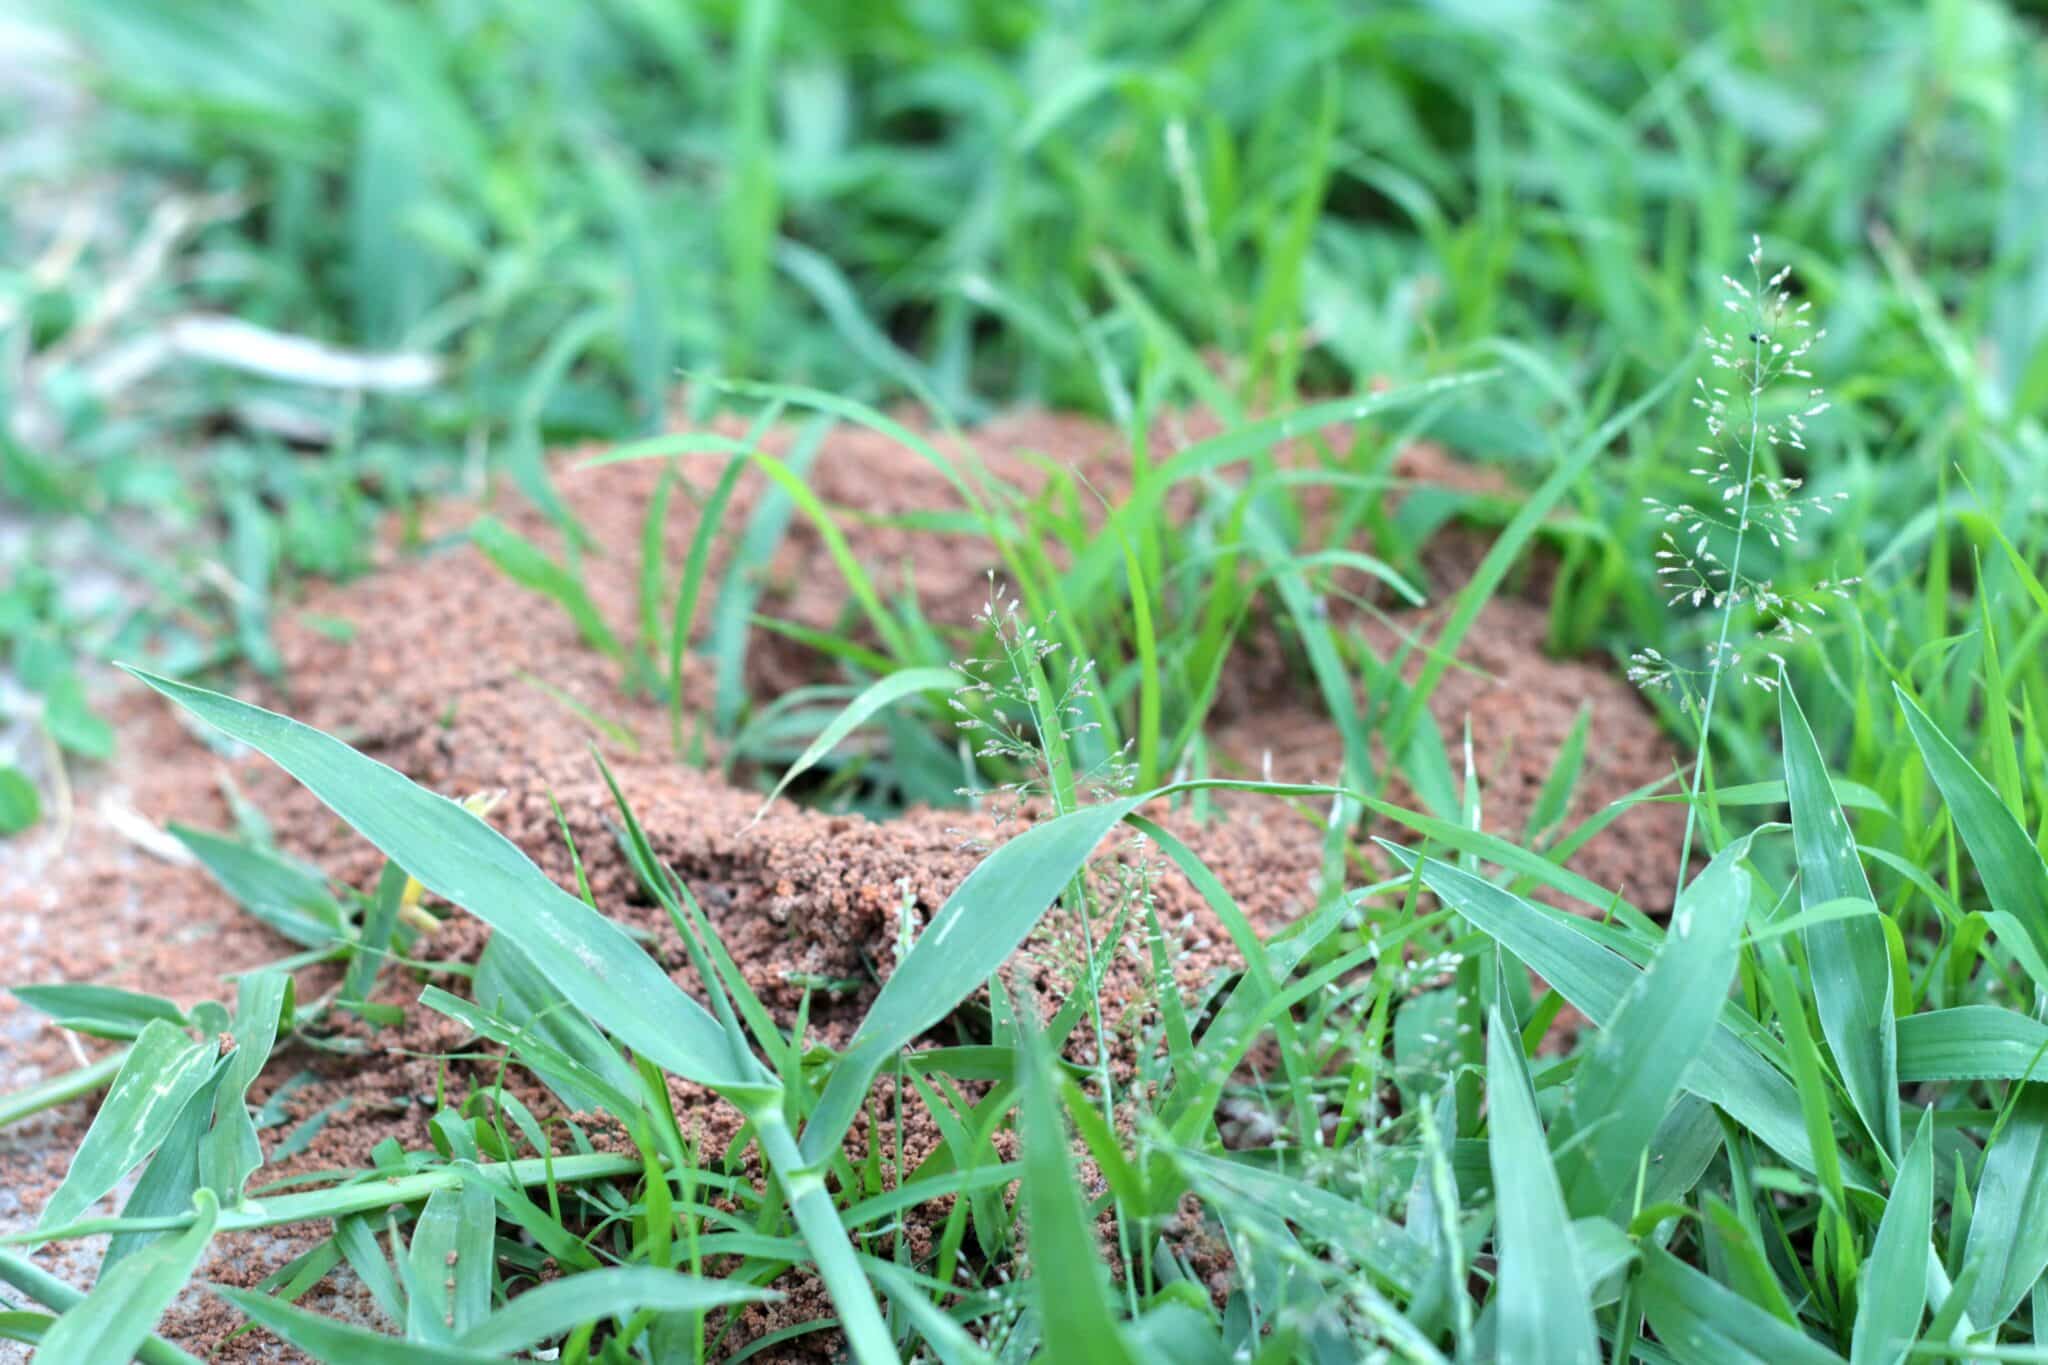 A fire ant mound surrounded by green grass.